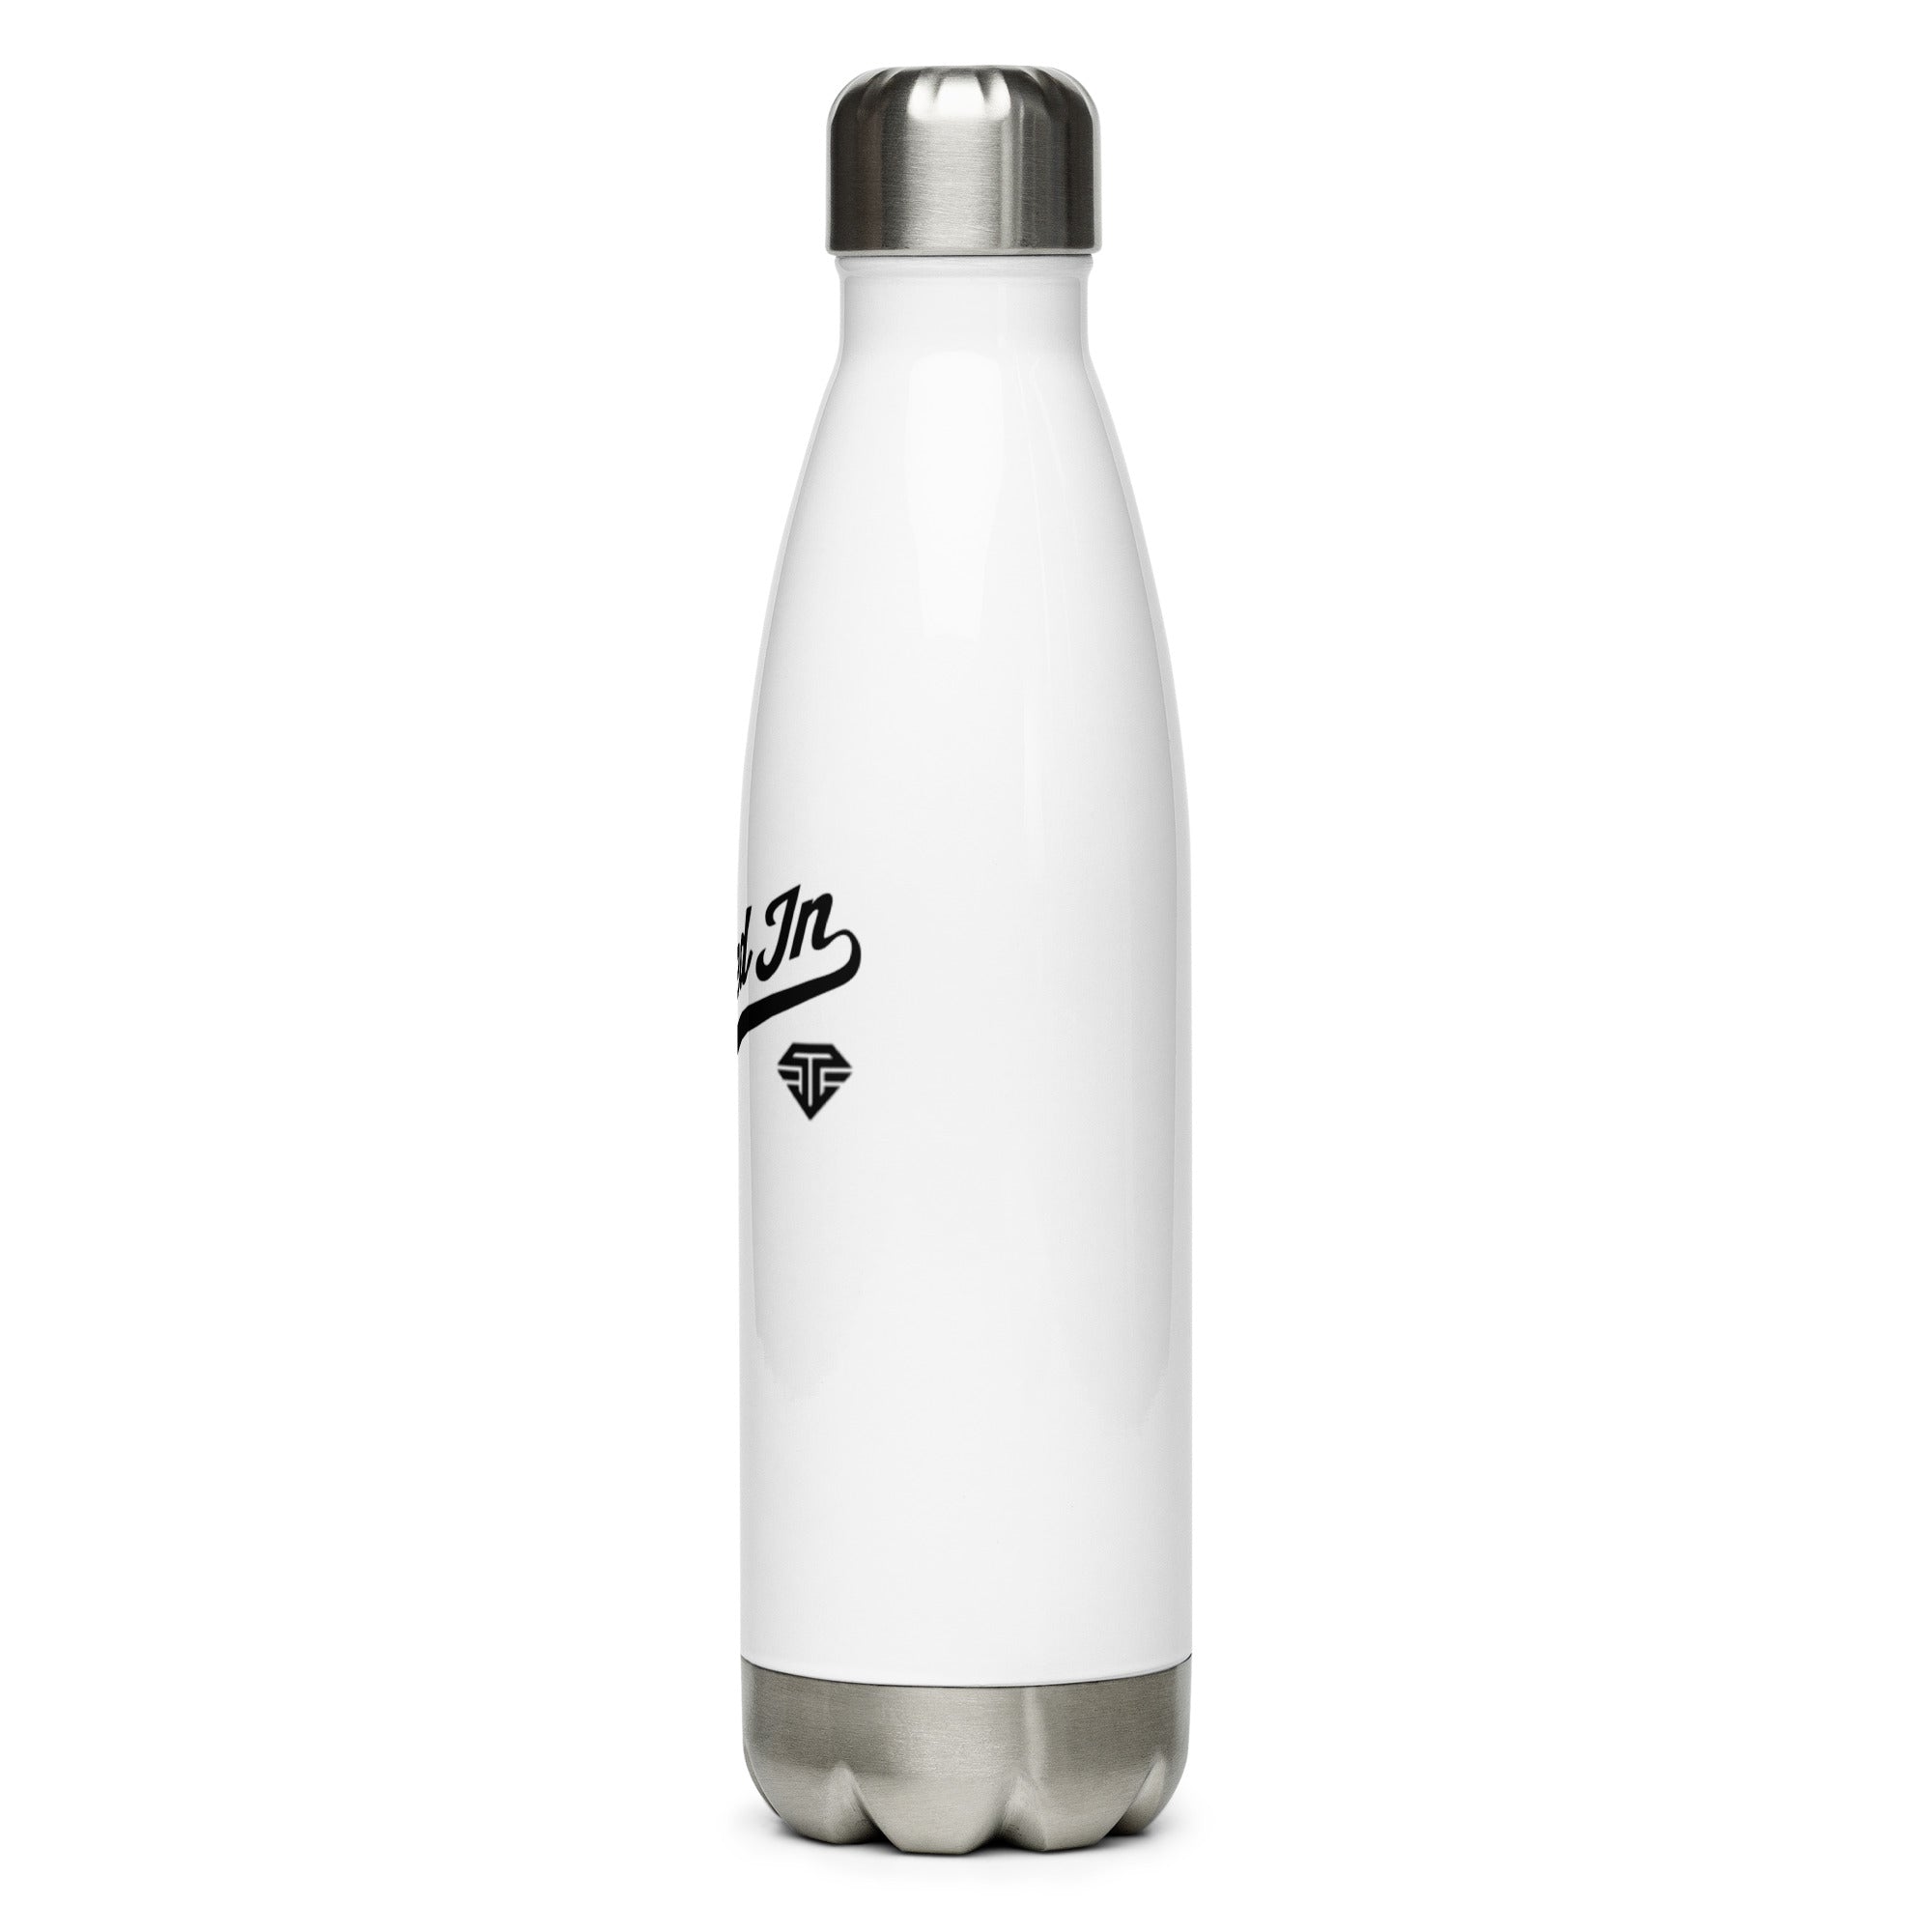 Tapped In Stainless Steel Water Bottle